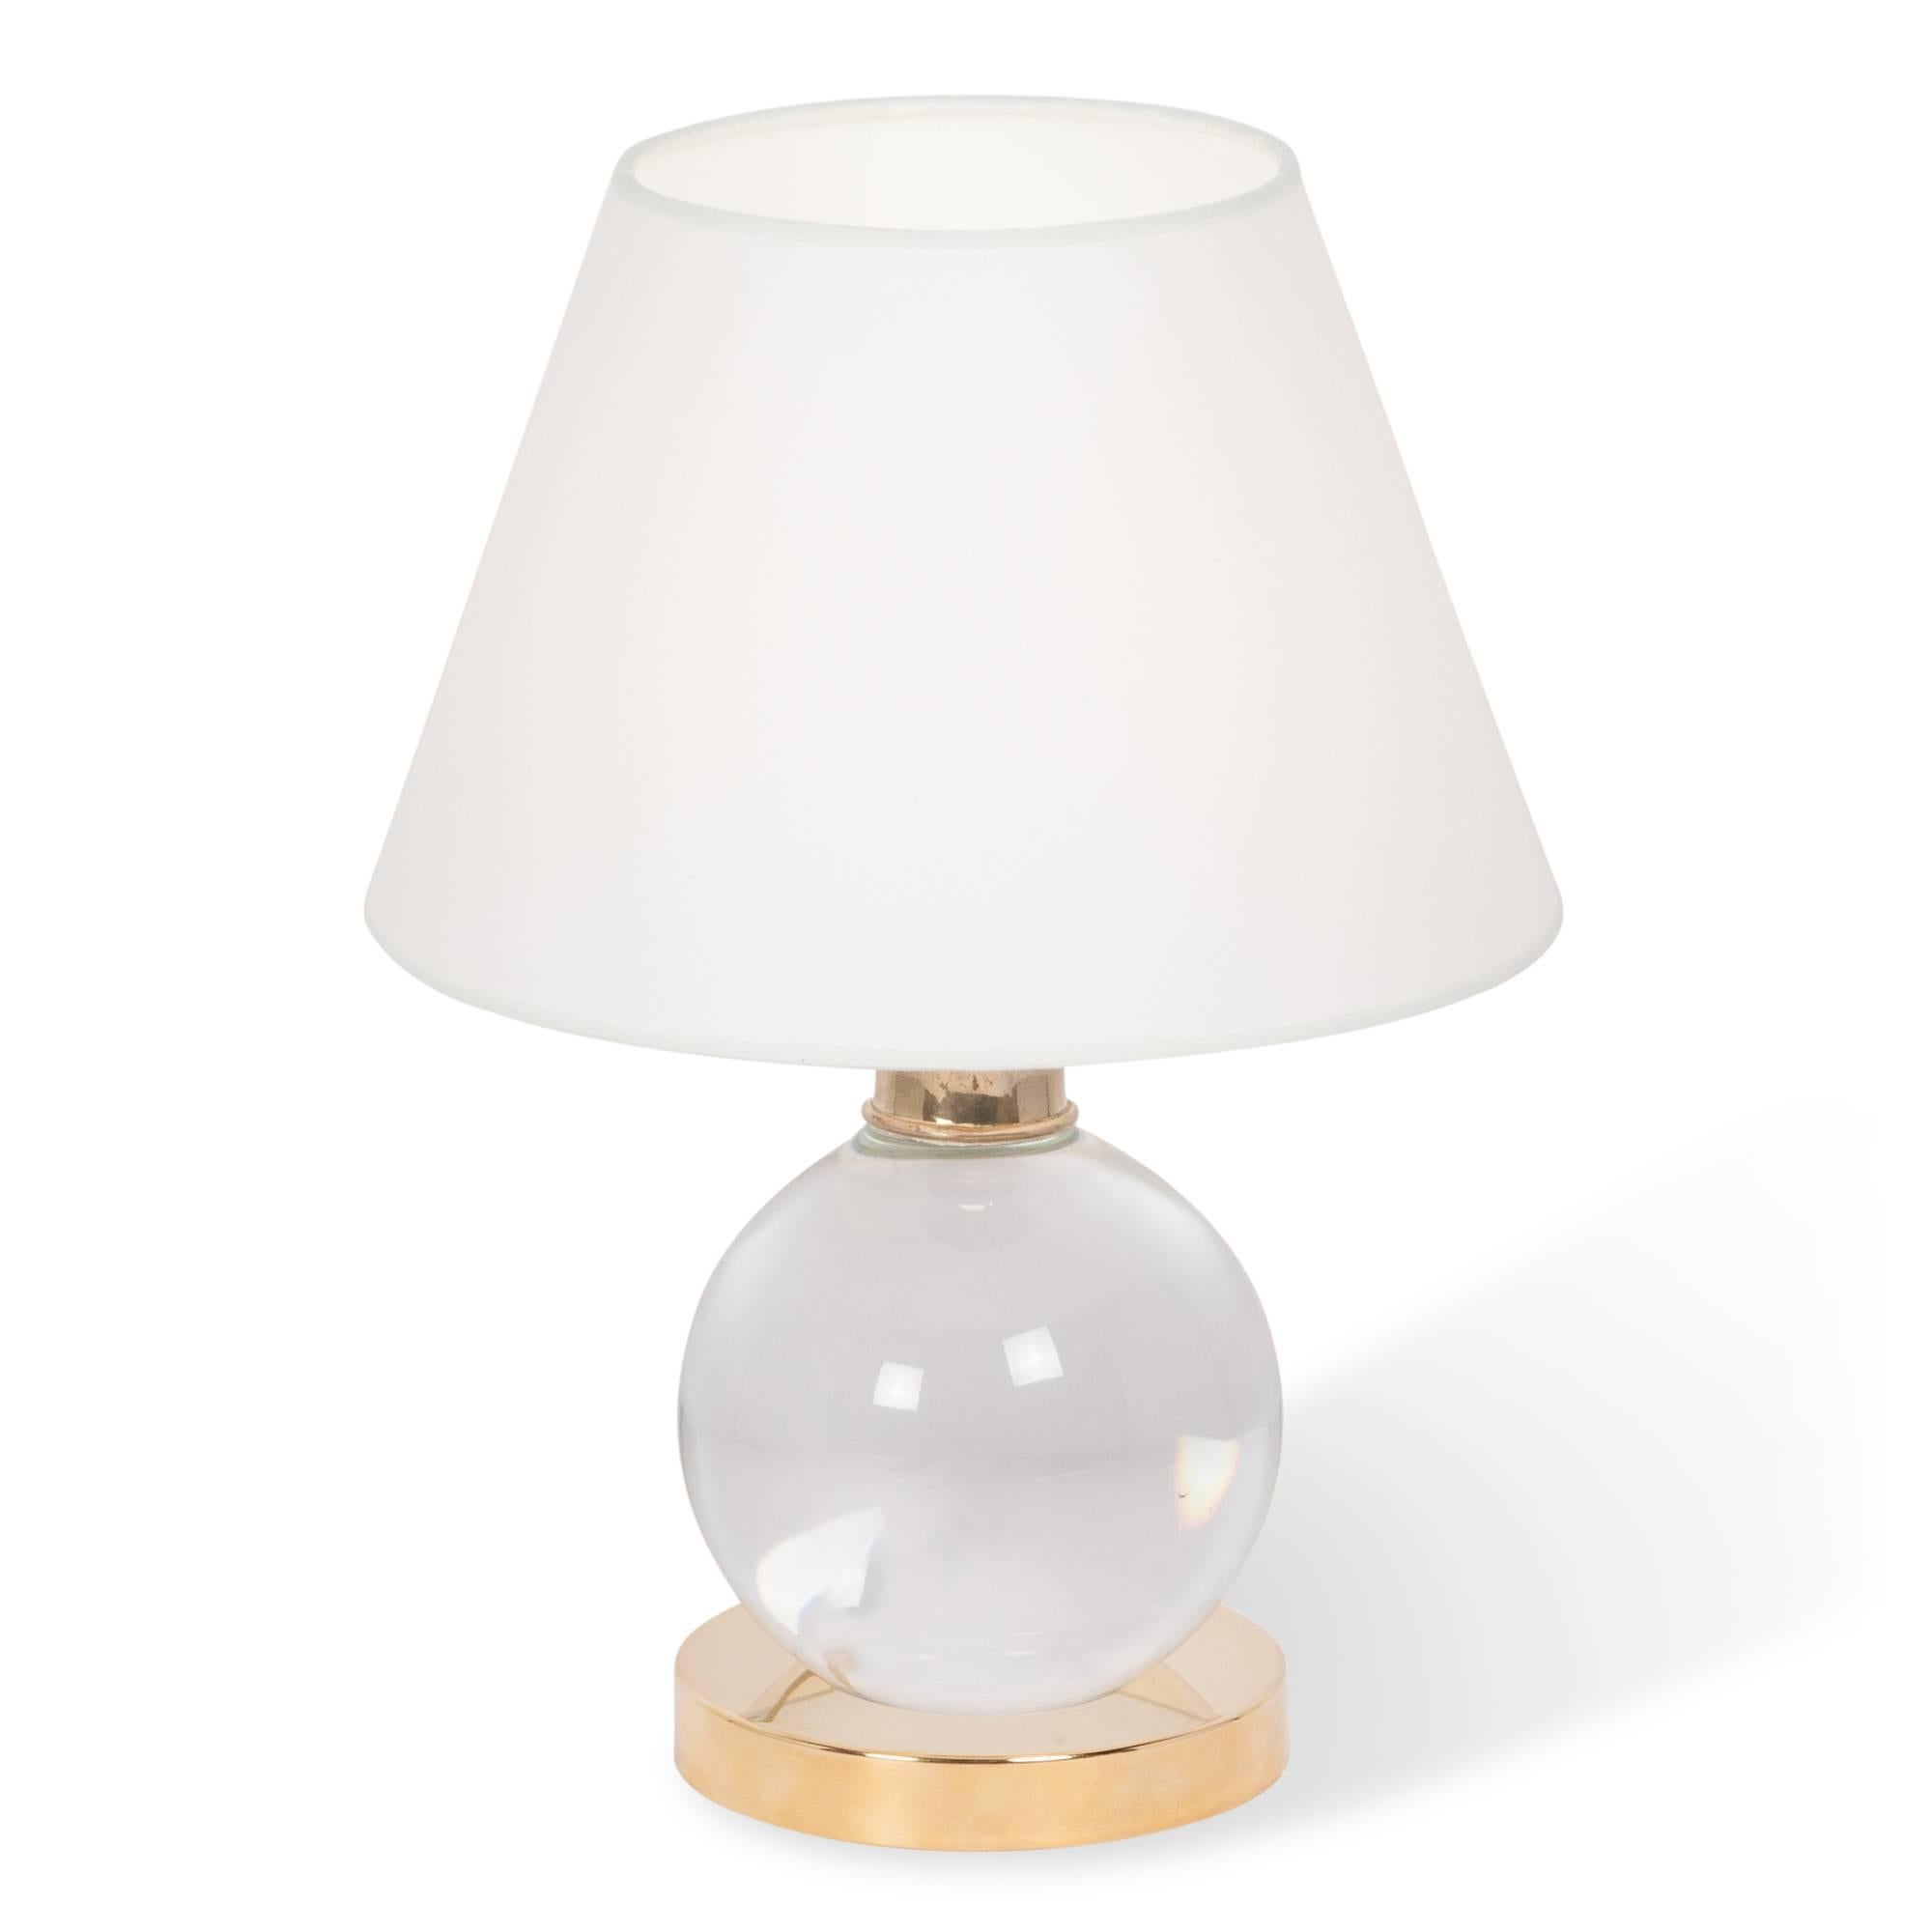 Crystal ball table lamp, pivotable in all directions on the disc base, in silk shade. Custom after a design by Jacques Adnet, limited production, 2000s. Overall height 13 in, base has 5 in diameter. Bottom diameter of shade is 9 in.

 